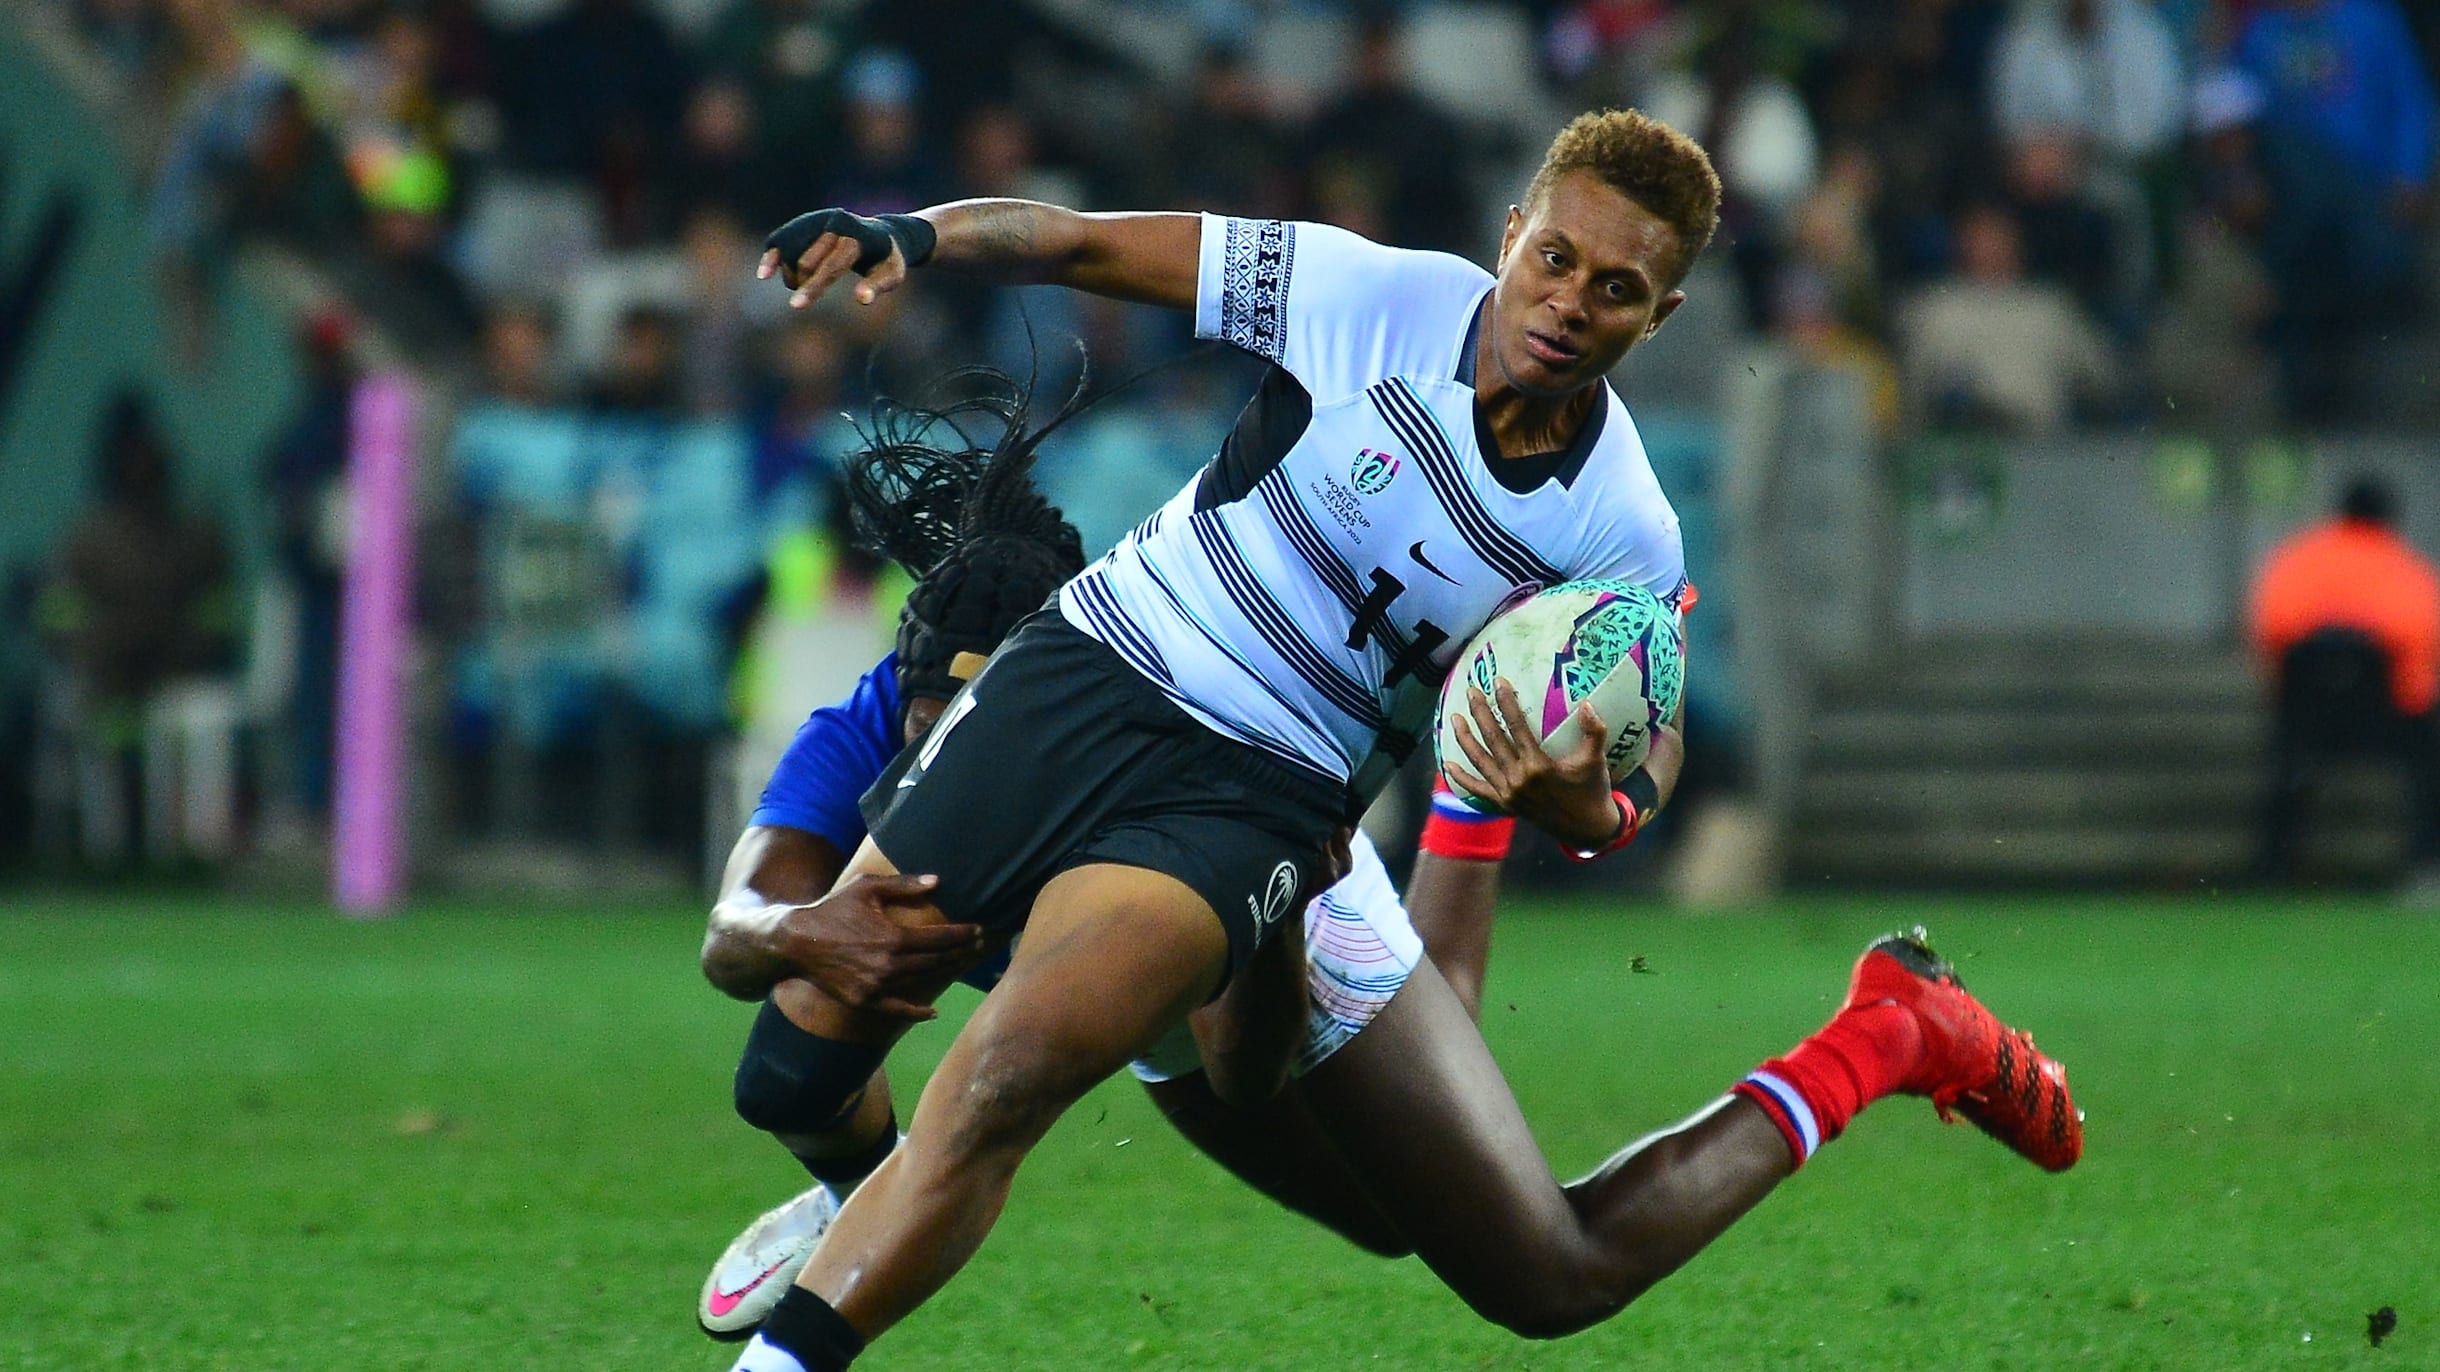 watch world rugby sevens live